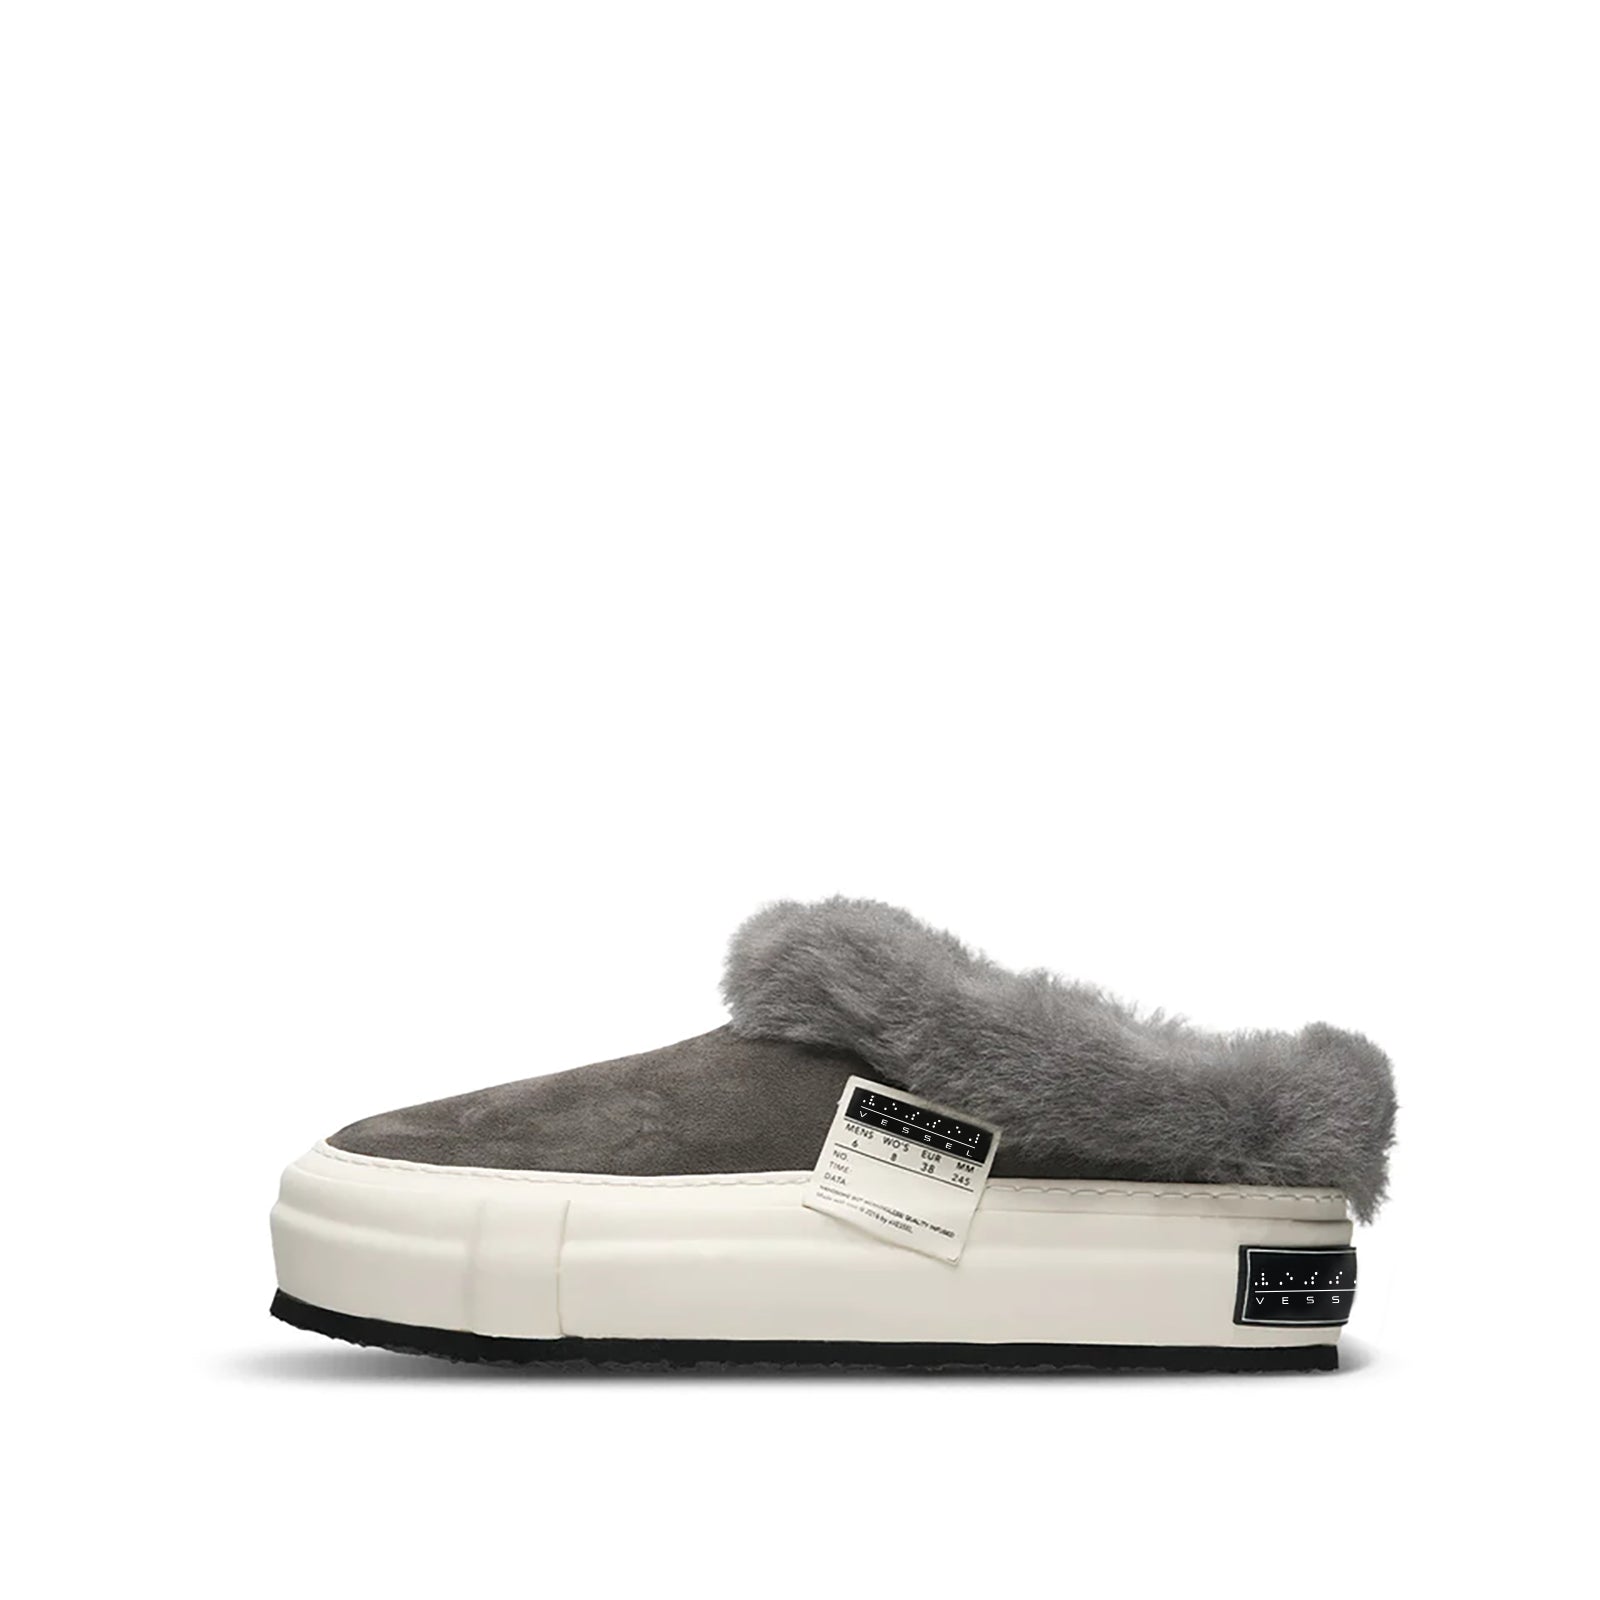 xVESSEL Slip On Warmers - Wolf Suede